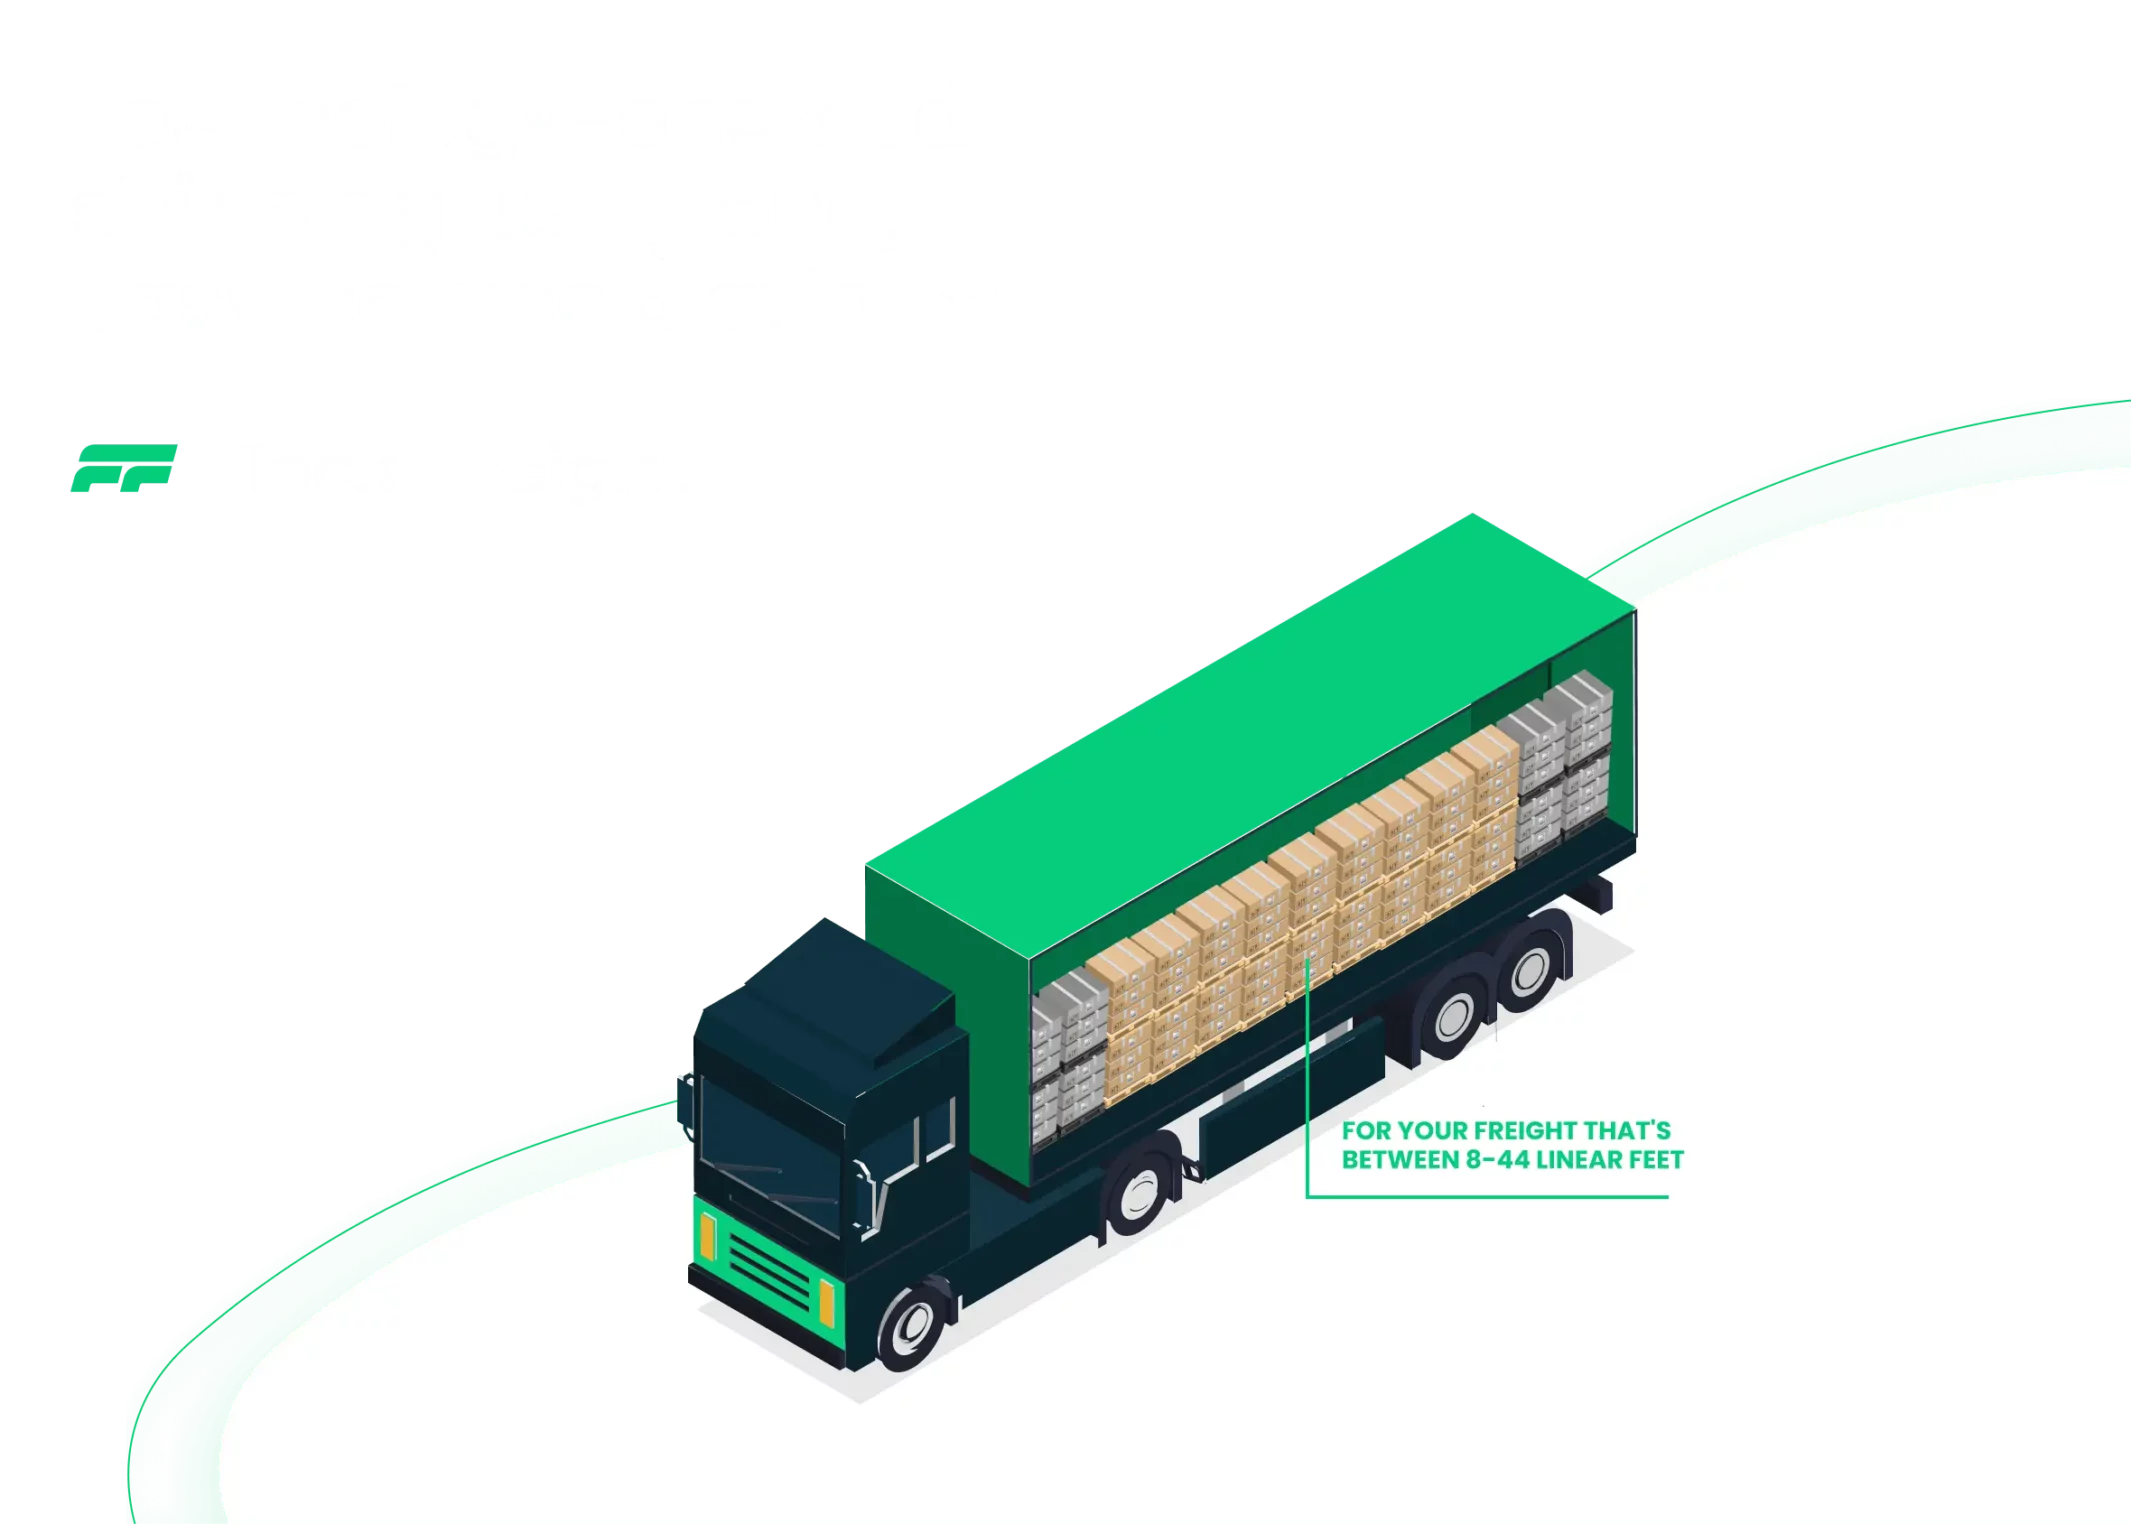 Illustration of a truck with boxes, explaining Flock Freight's shipping practices